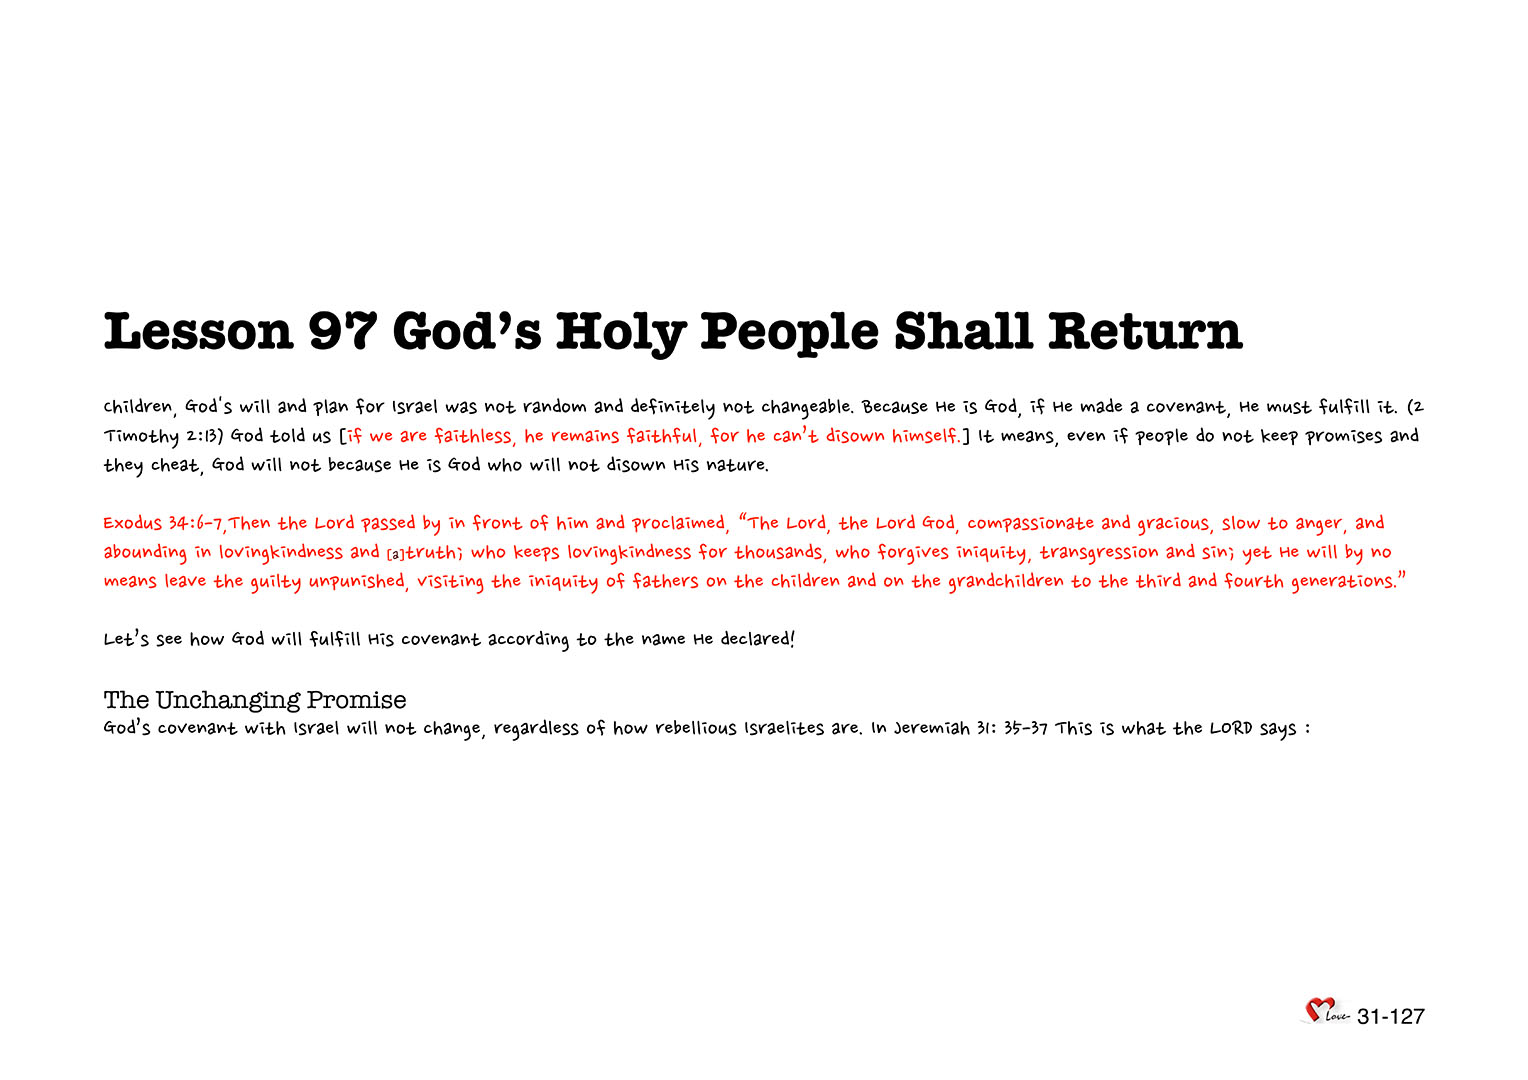 Chapter 31 - Lesson 97 - God’s Holy People Shall Return